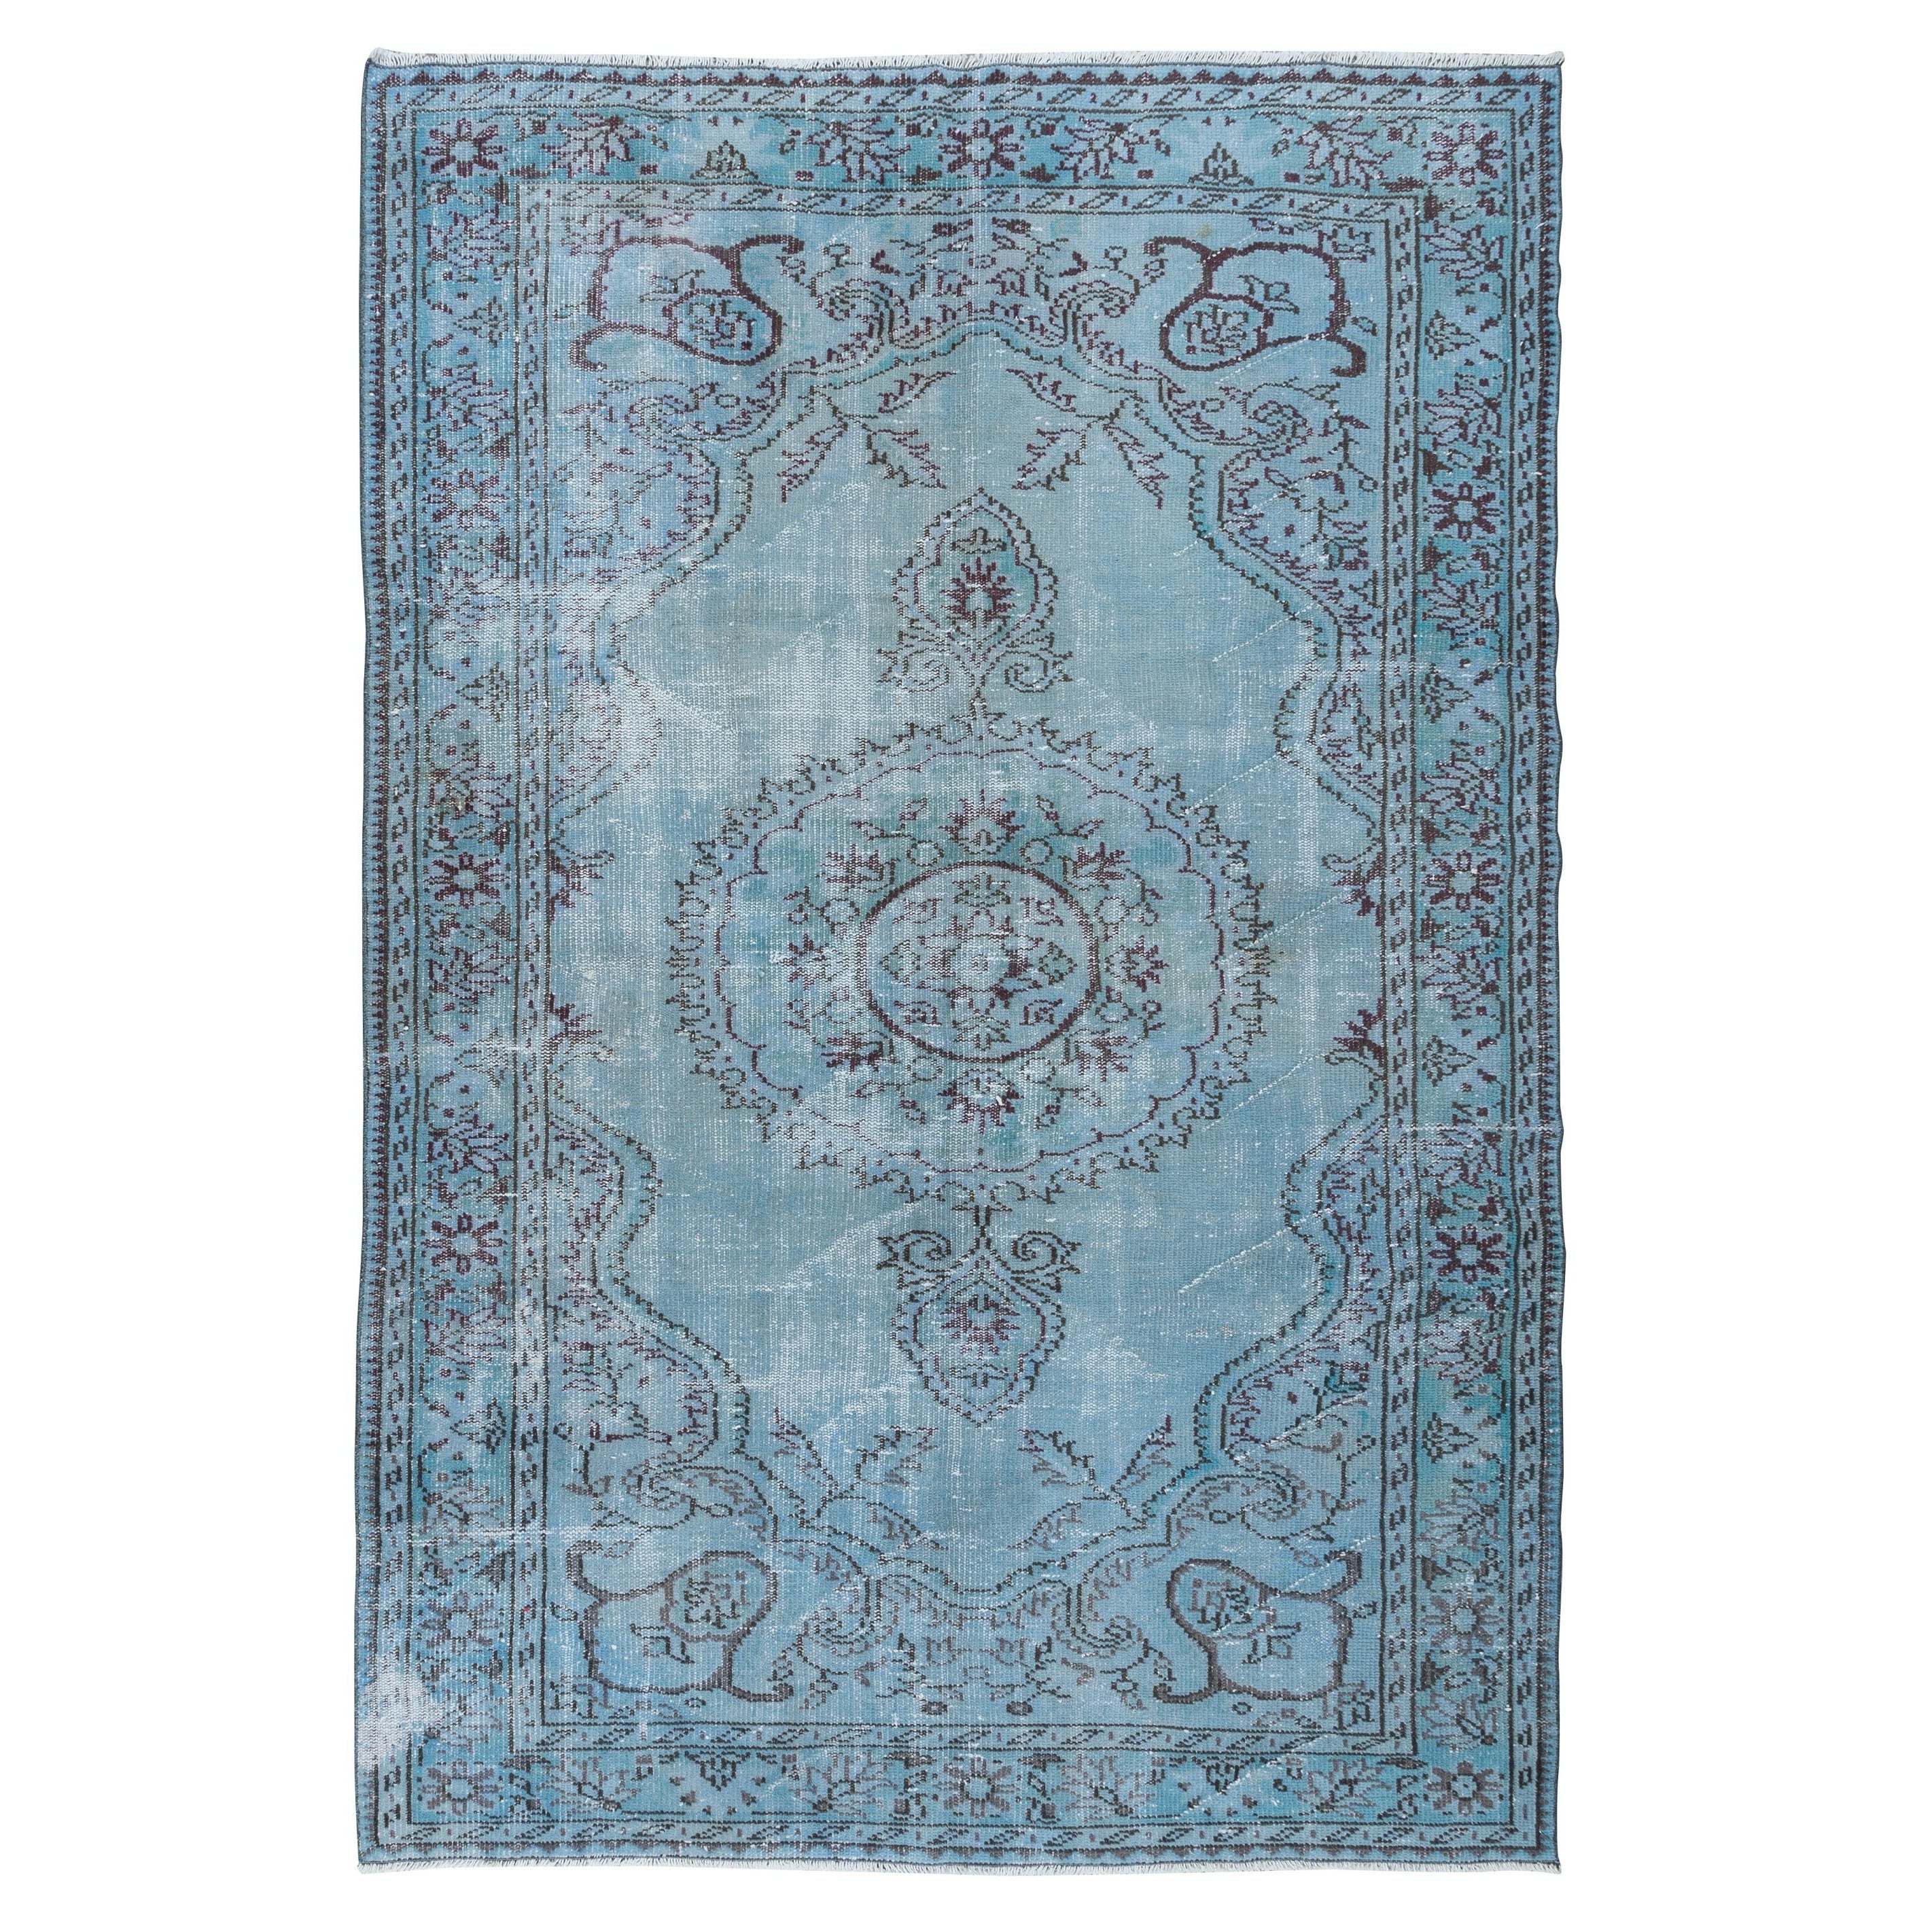 6x8.7 Ft Handmade Turkish Rug Over-Dyed in Light Blue, Contemporary Carpet (tapis contemporain)